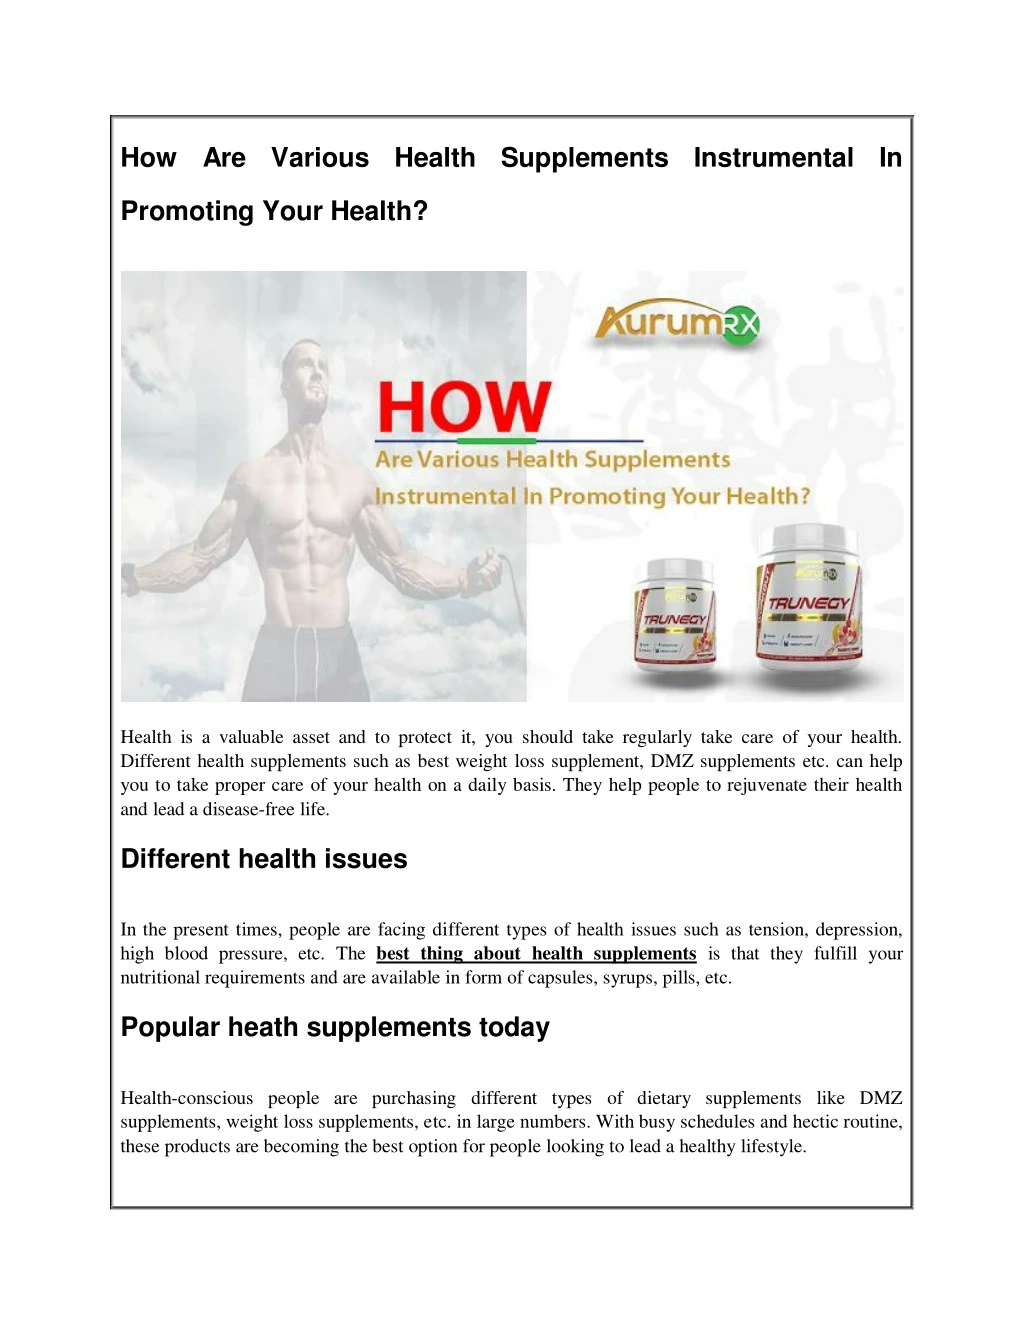 how are various health supplements instrumental in